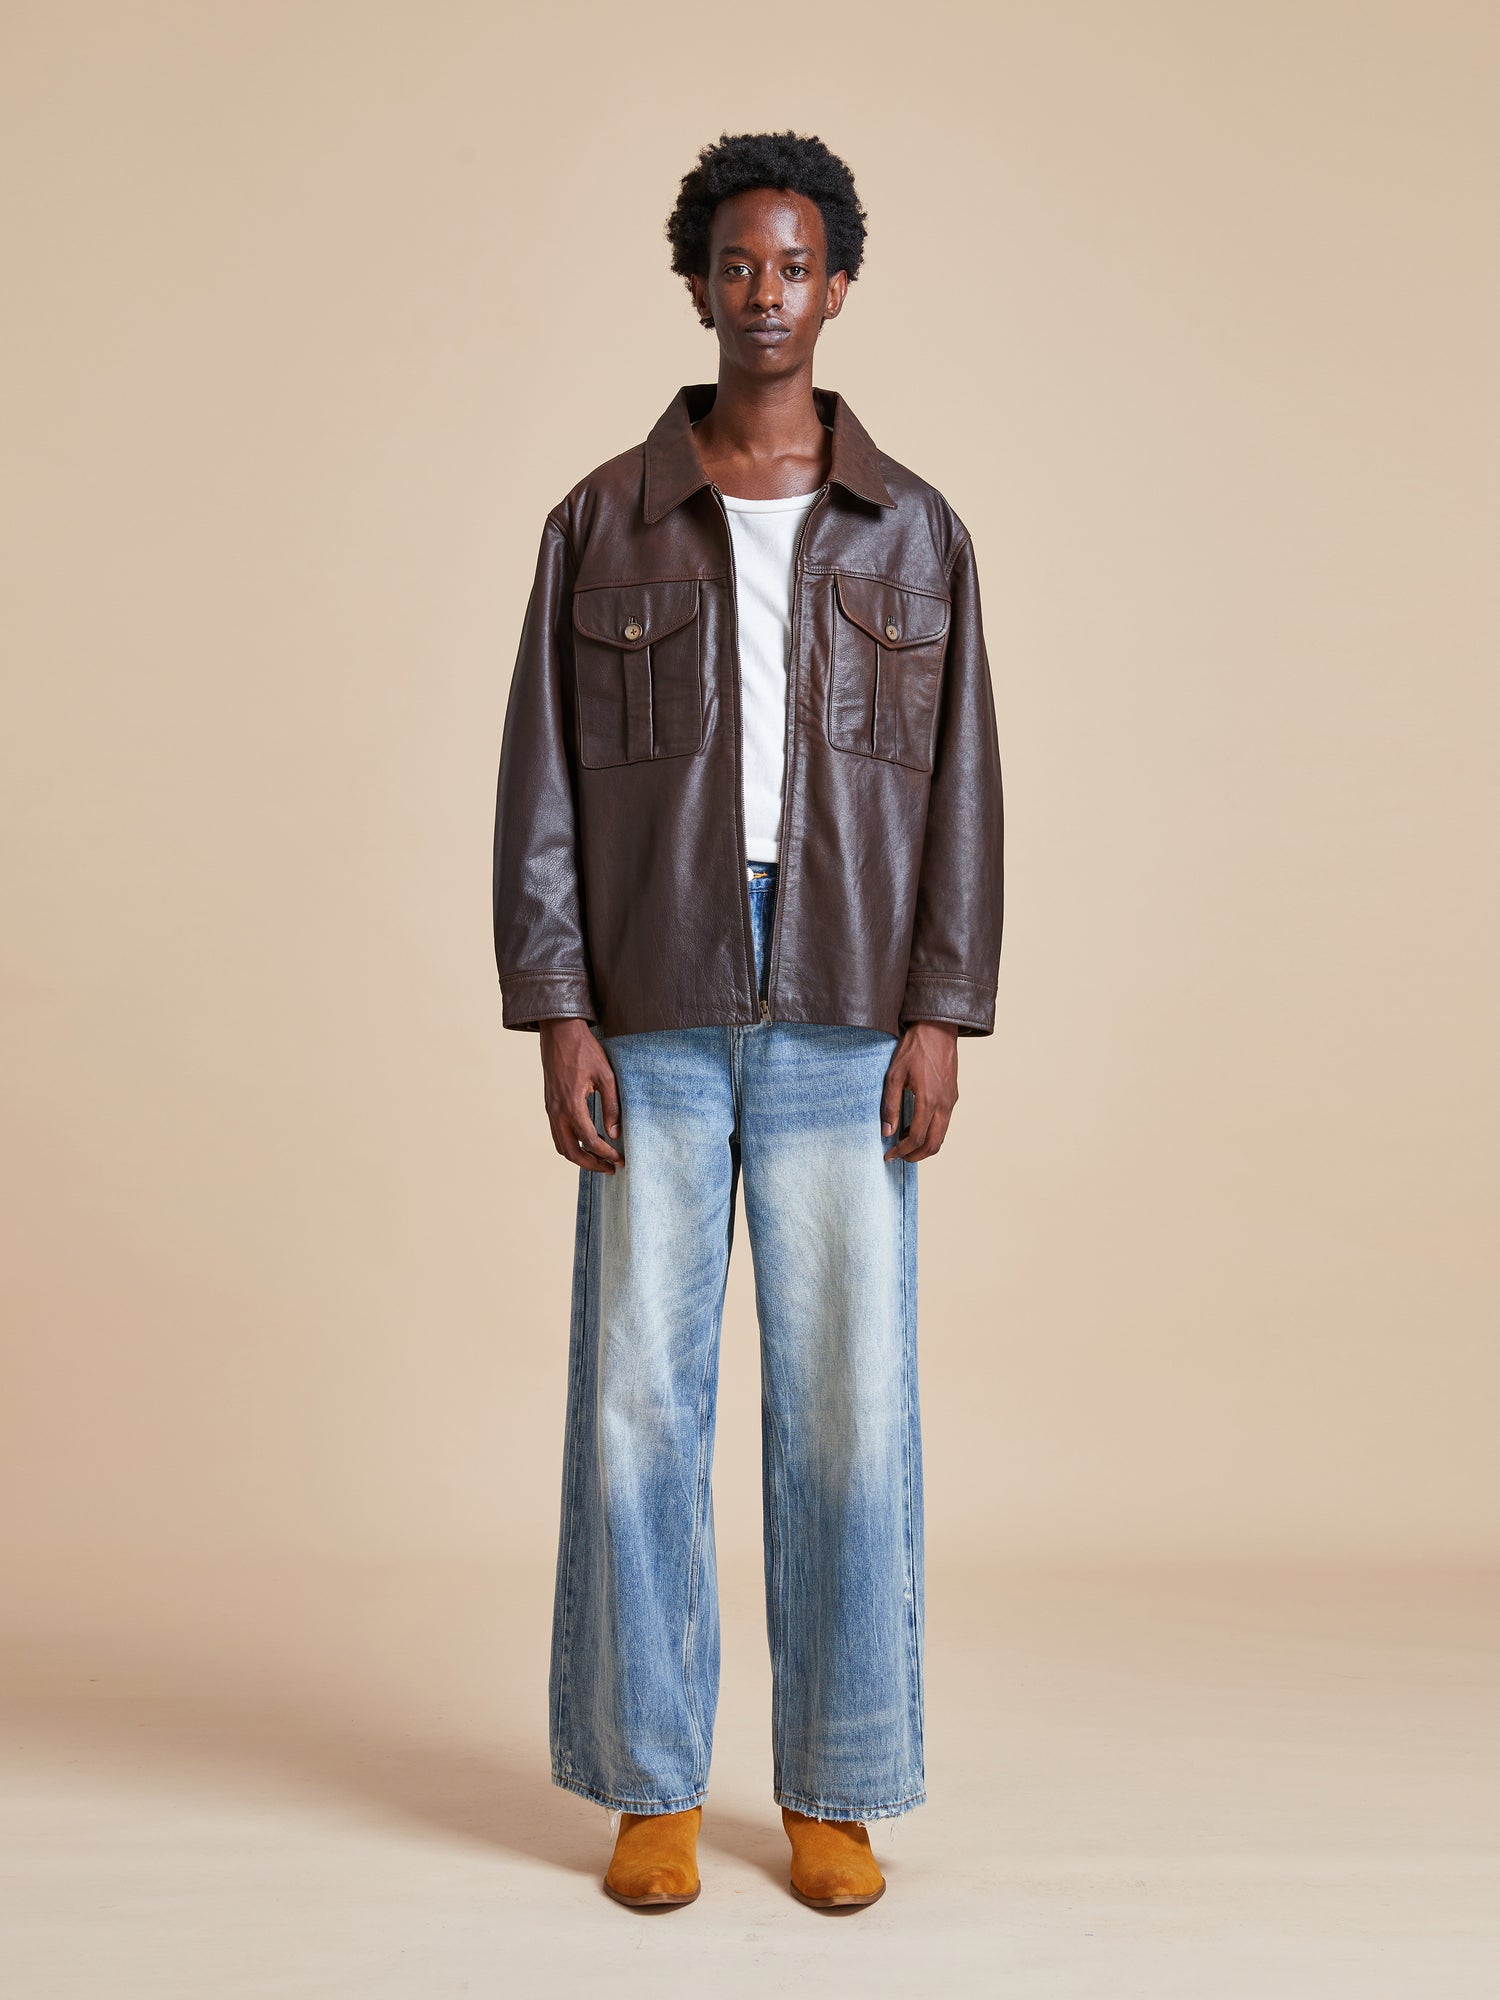 The model is wearing a Sepia Leather Overshirt by Found and jeans.